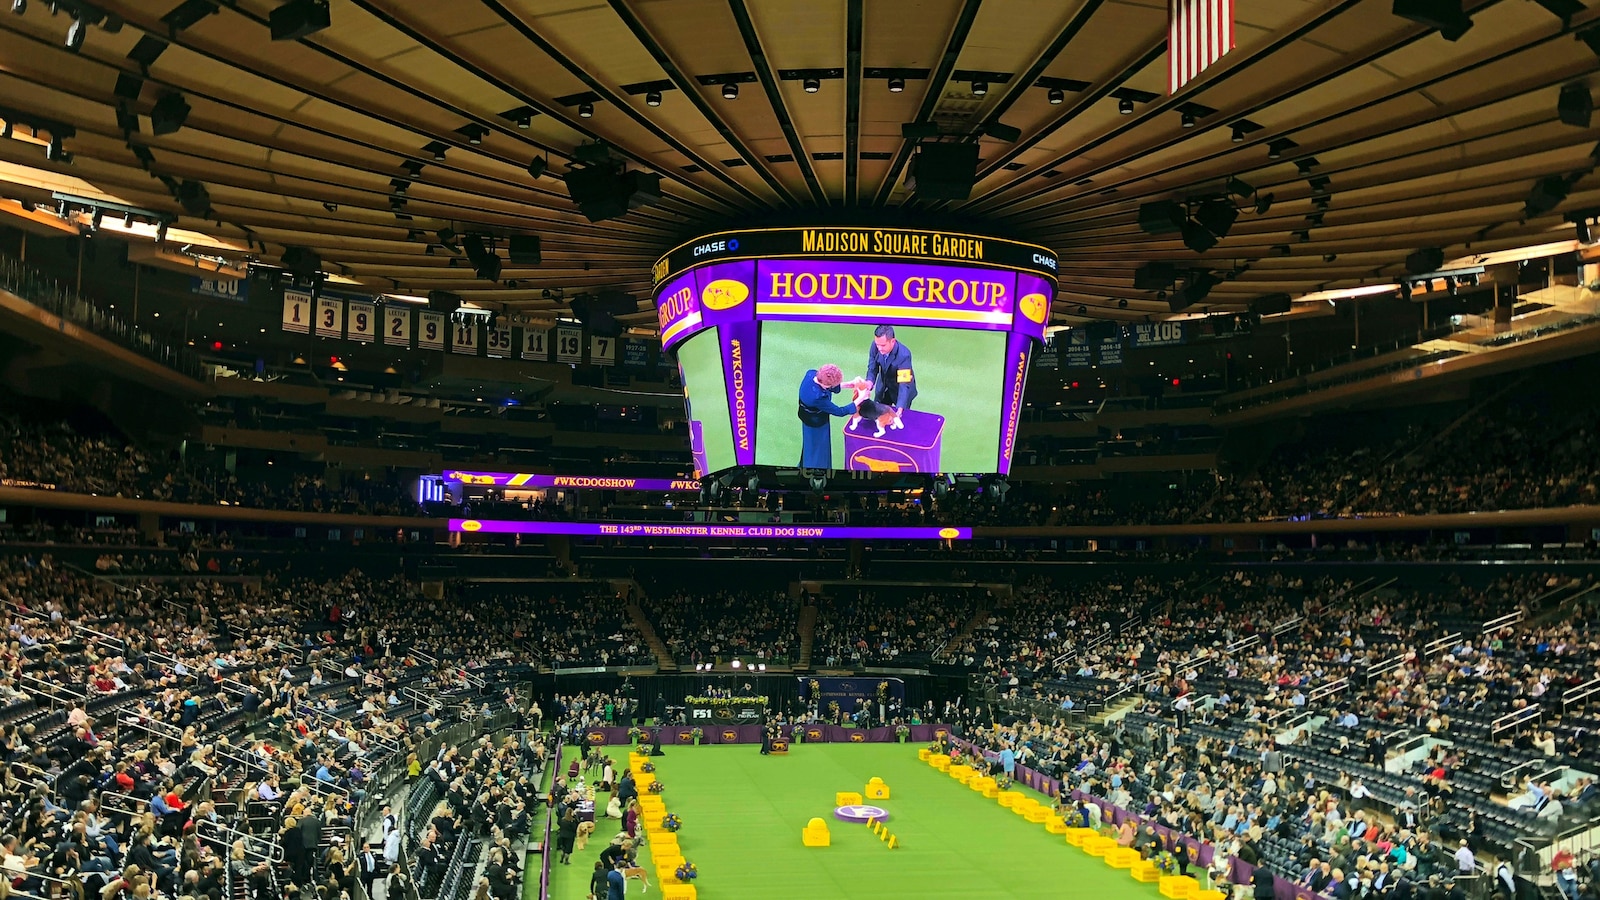 Westminster Dog Show to Return to Madison Square Garden in 2022